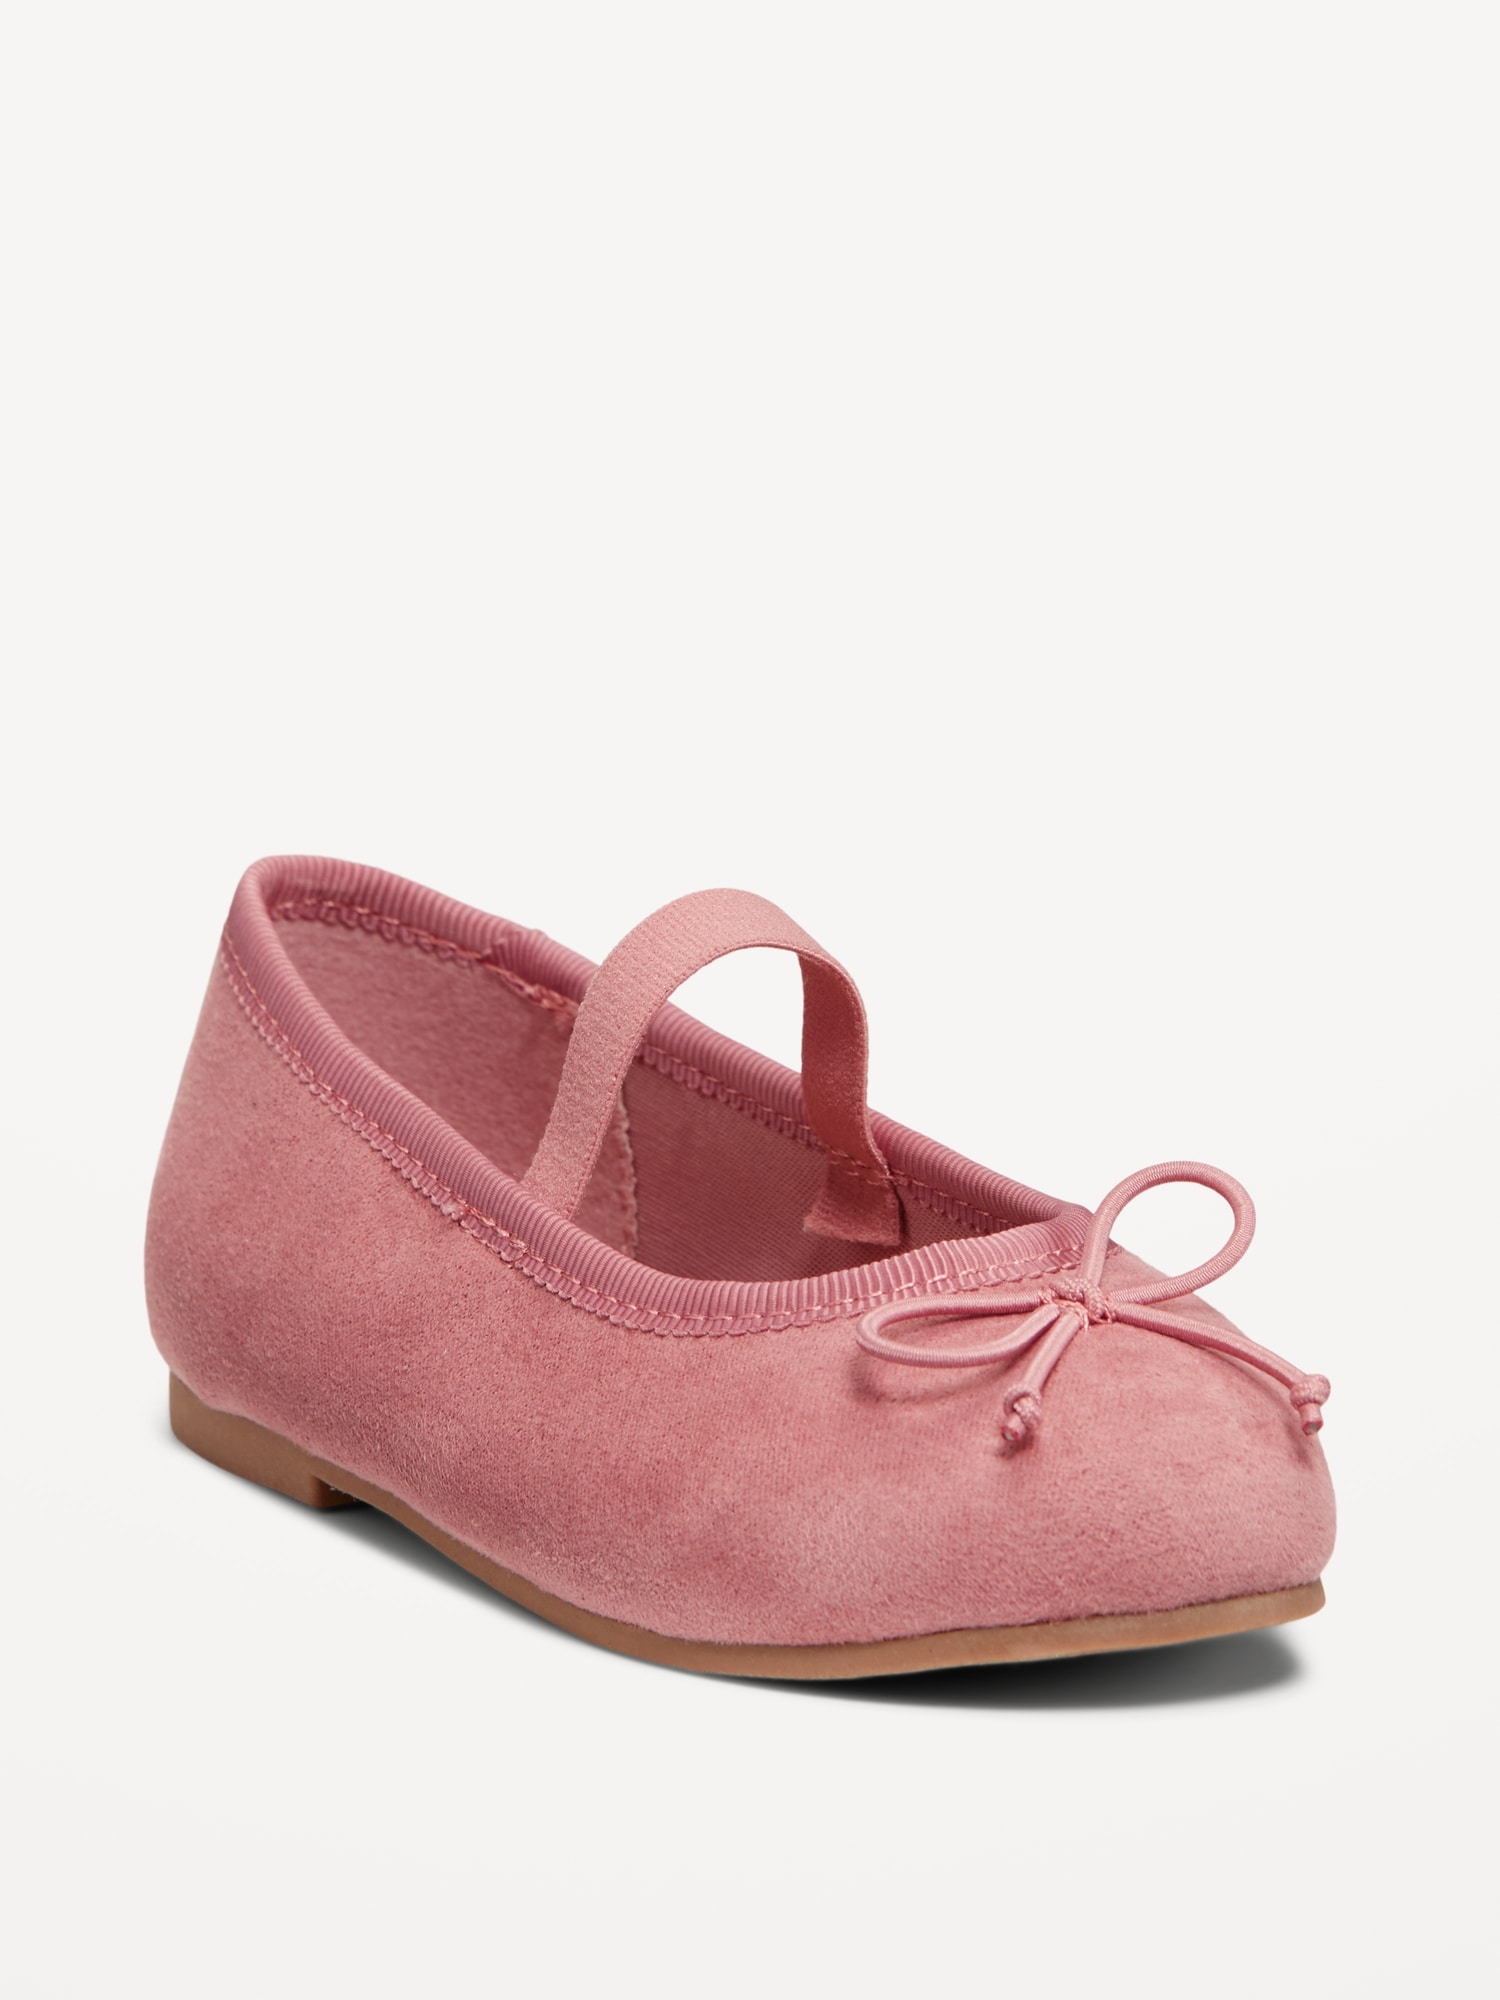 Faux-Suede Ballet Flats for Toddler Girls